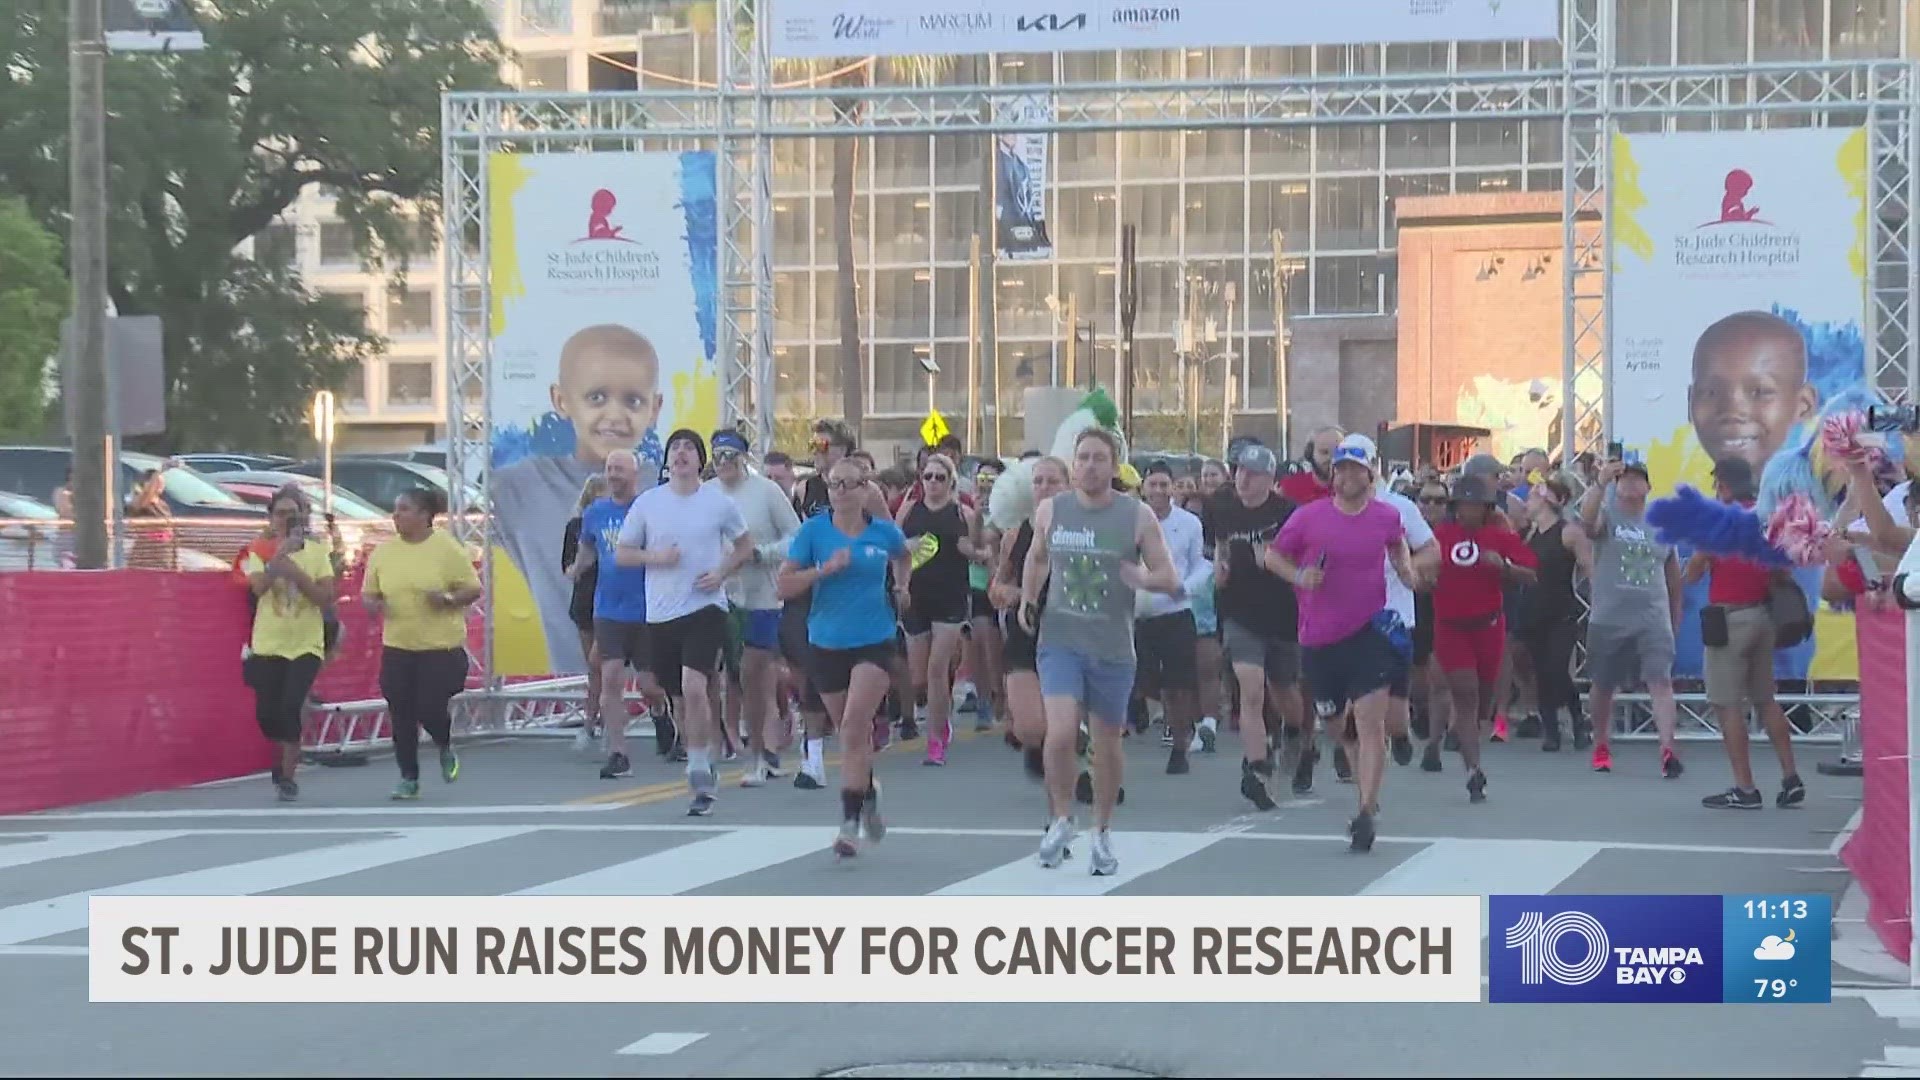 Families shared emotional stories at the organization's walk/run in Tampa, which raised money for childhood cancer research.